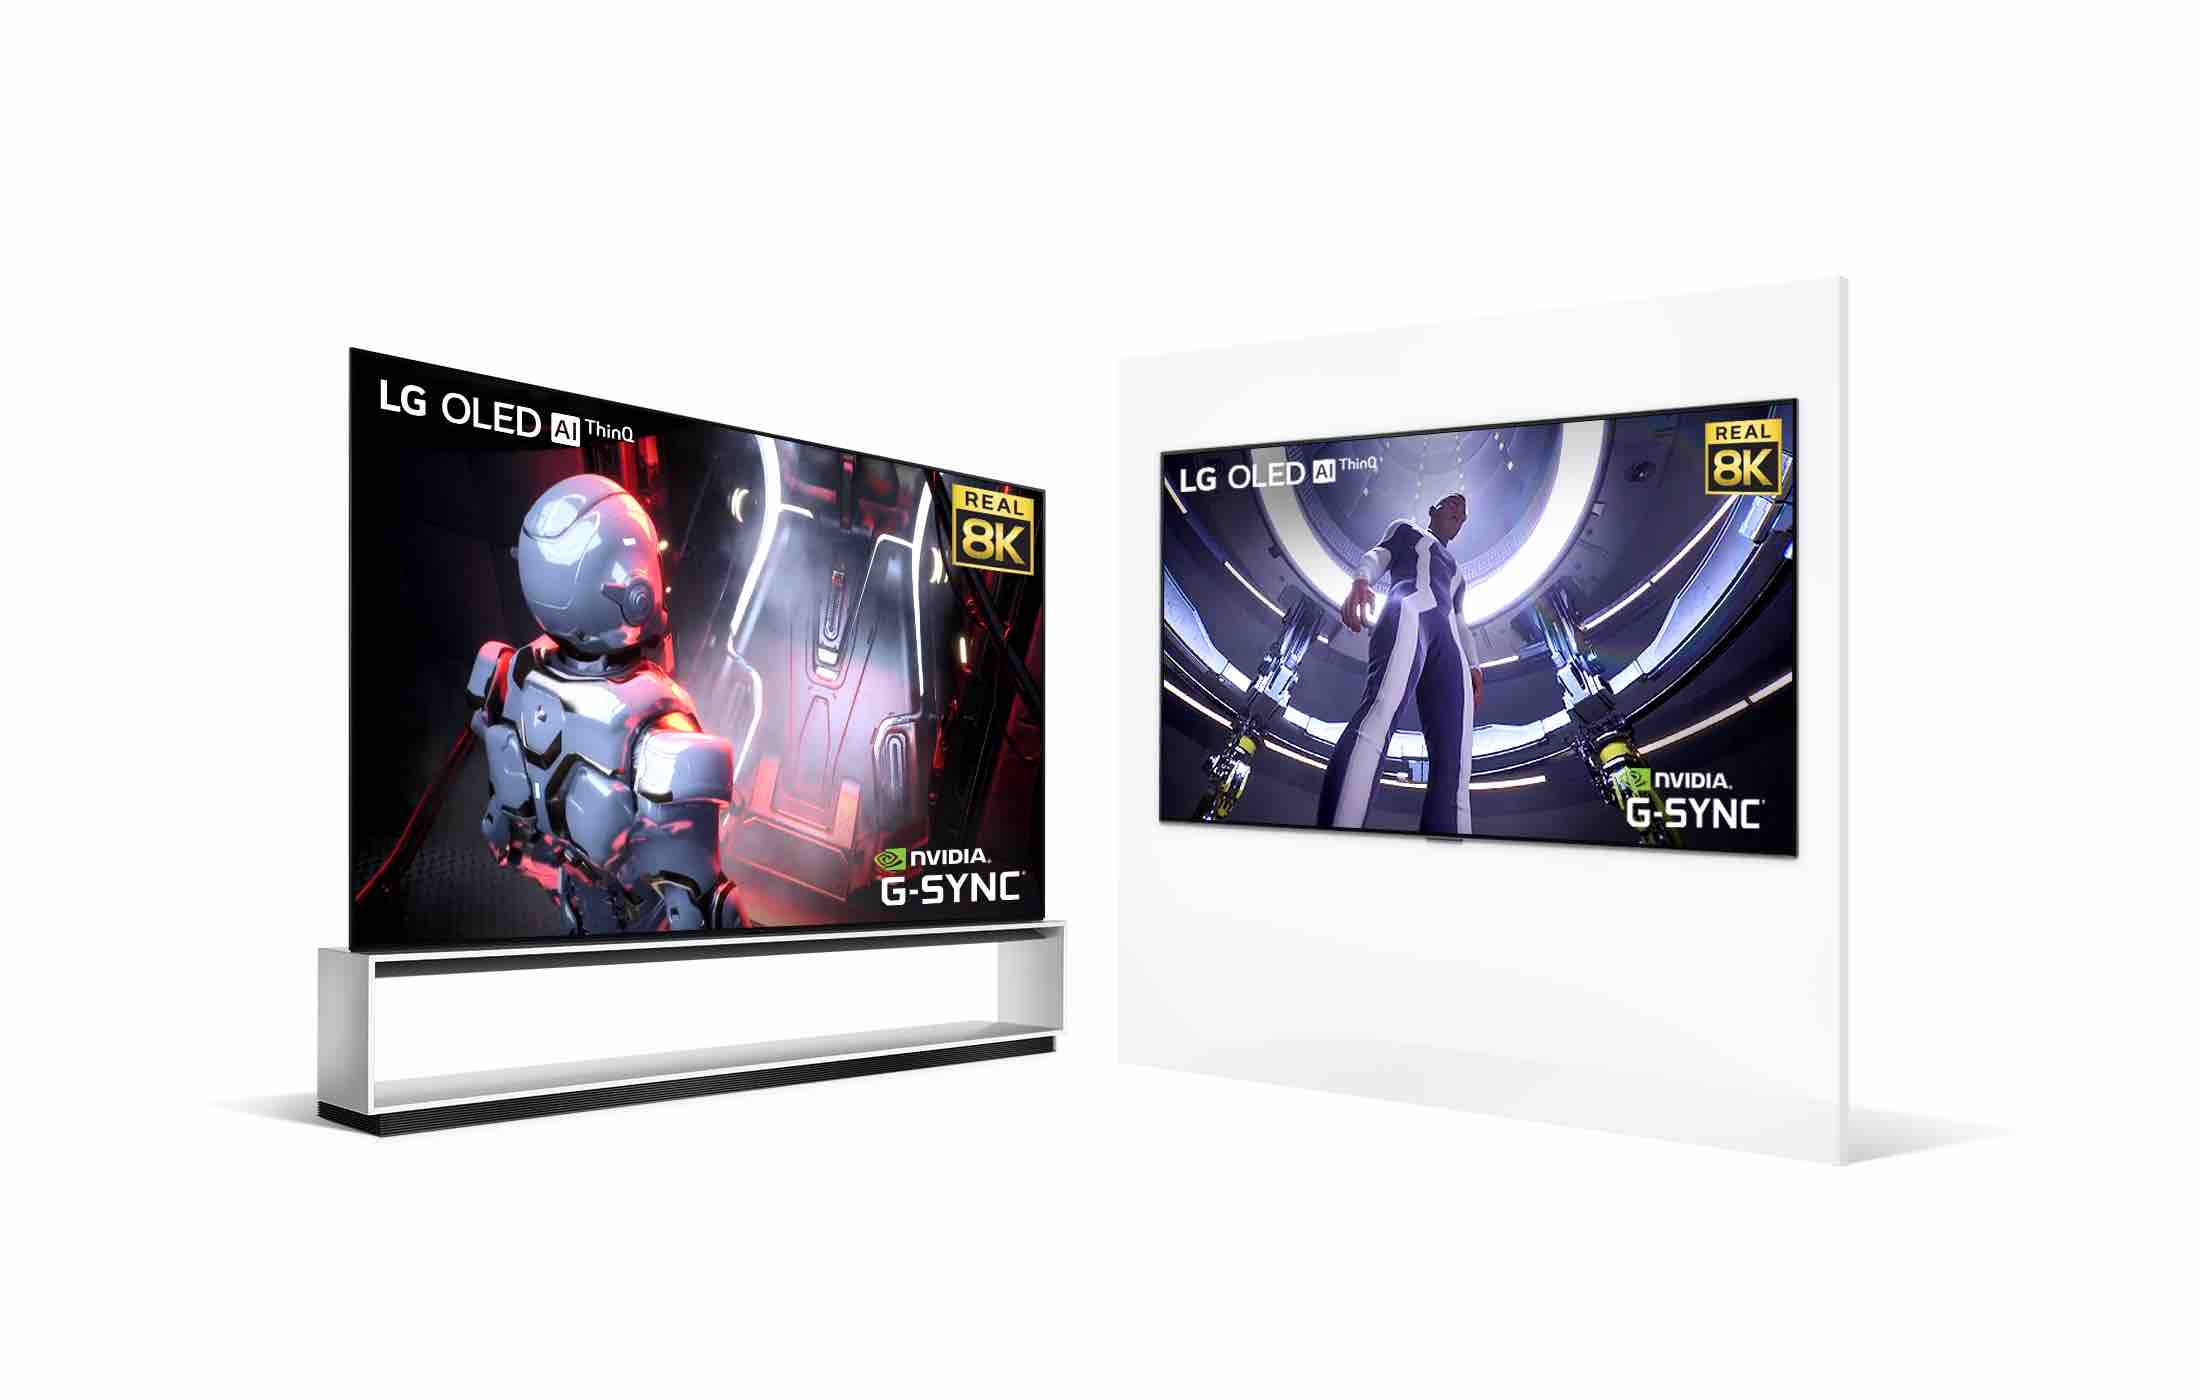 LG announces OLED TVs with advanced Gaming Capabilities